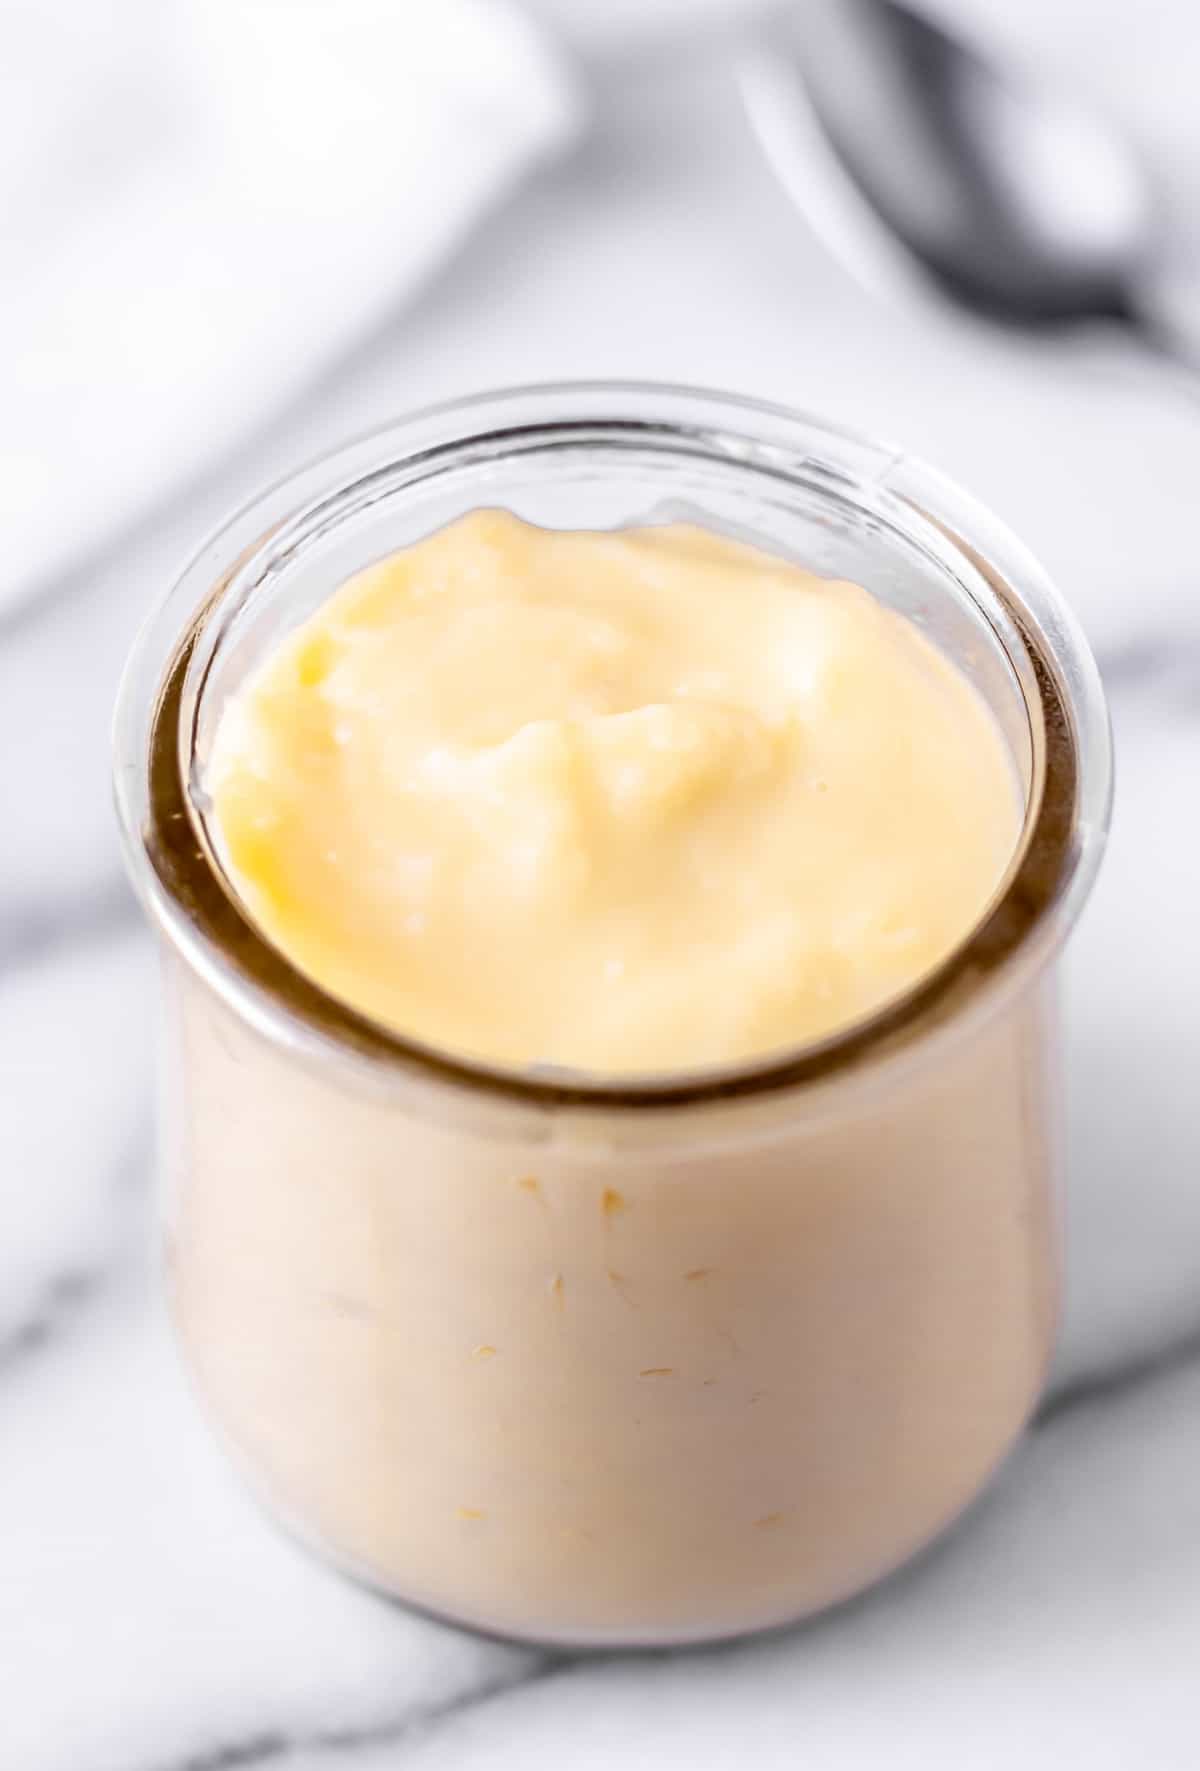 Pastry cream in a glass jar with a spoon and napkin in the background.